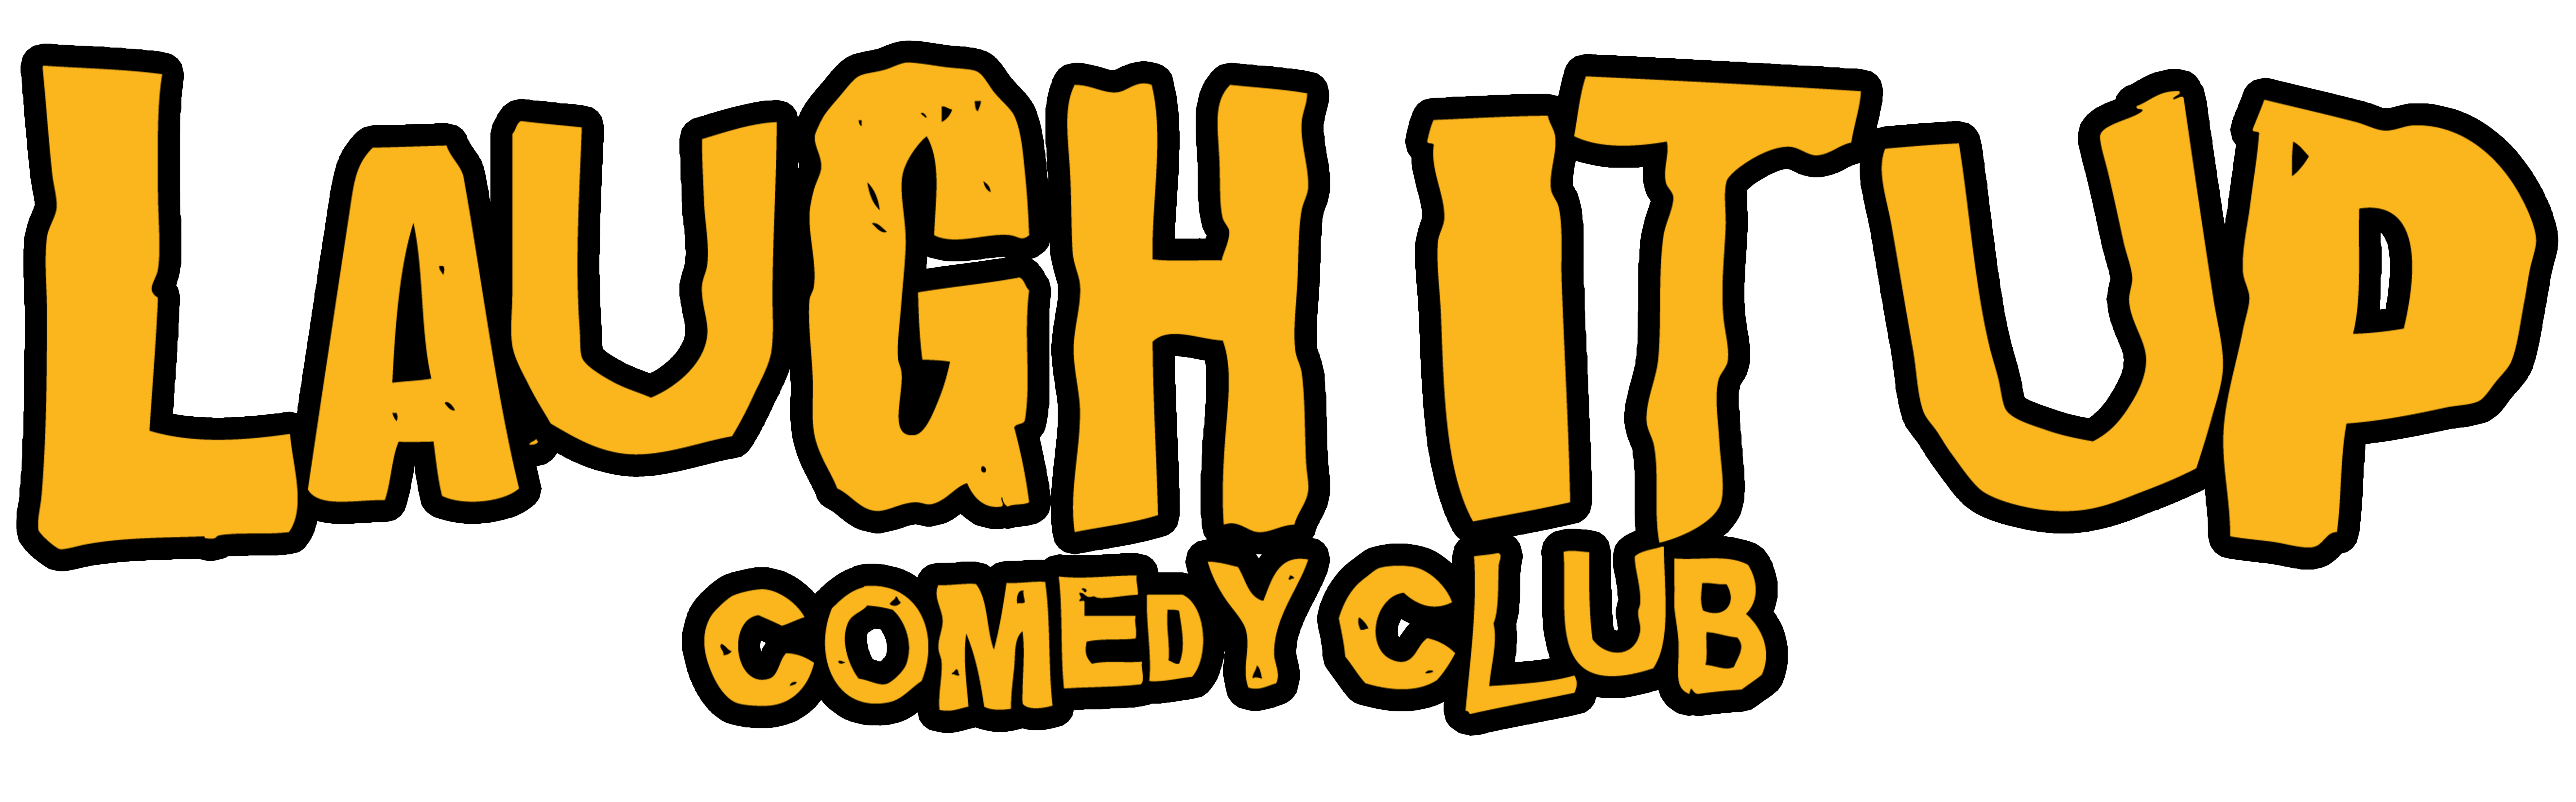 Home LAUGH IT UP COMEDY CLUB